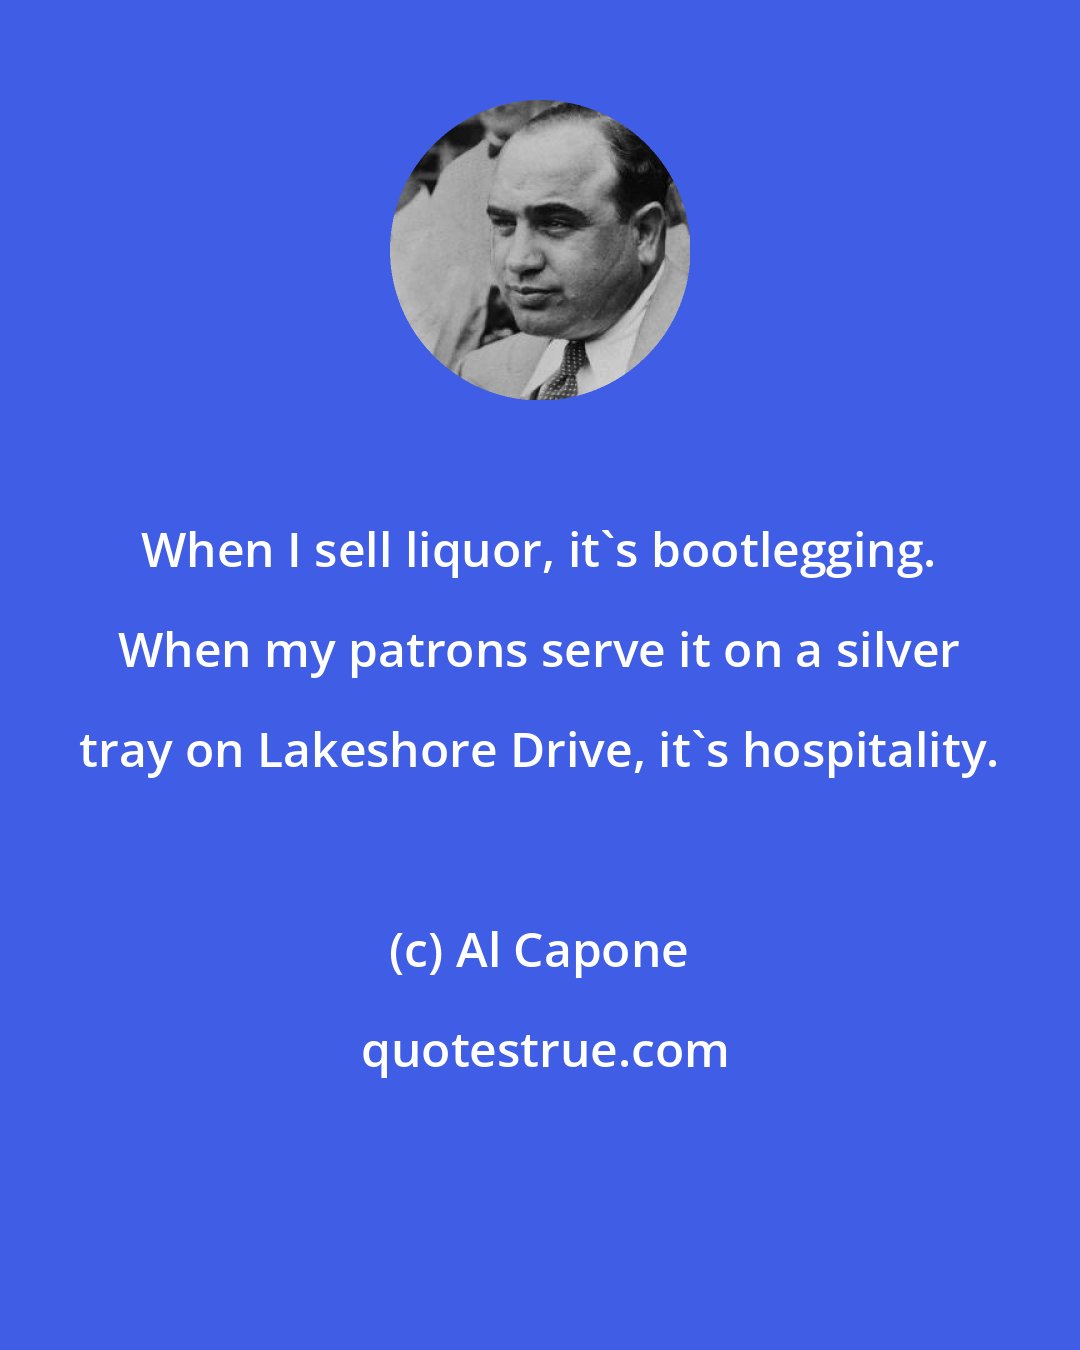 Al Capone: When I sell liquor, it's bootlegging. When my patrons serve it on a silver tray on Lakeshore Drive, it's hospitality.